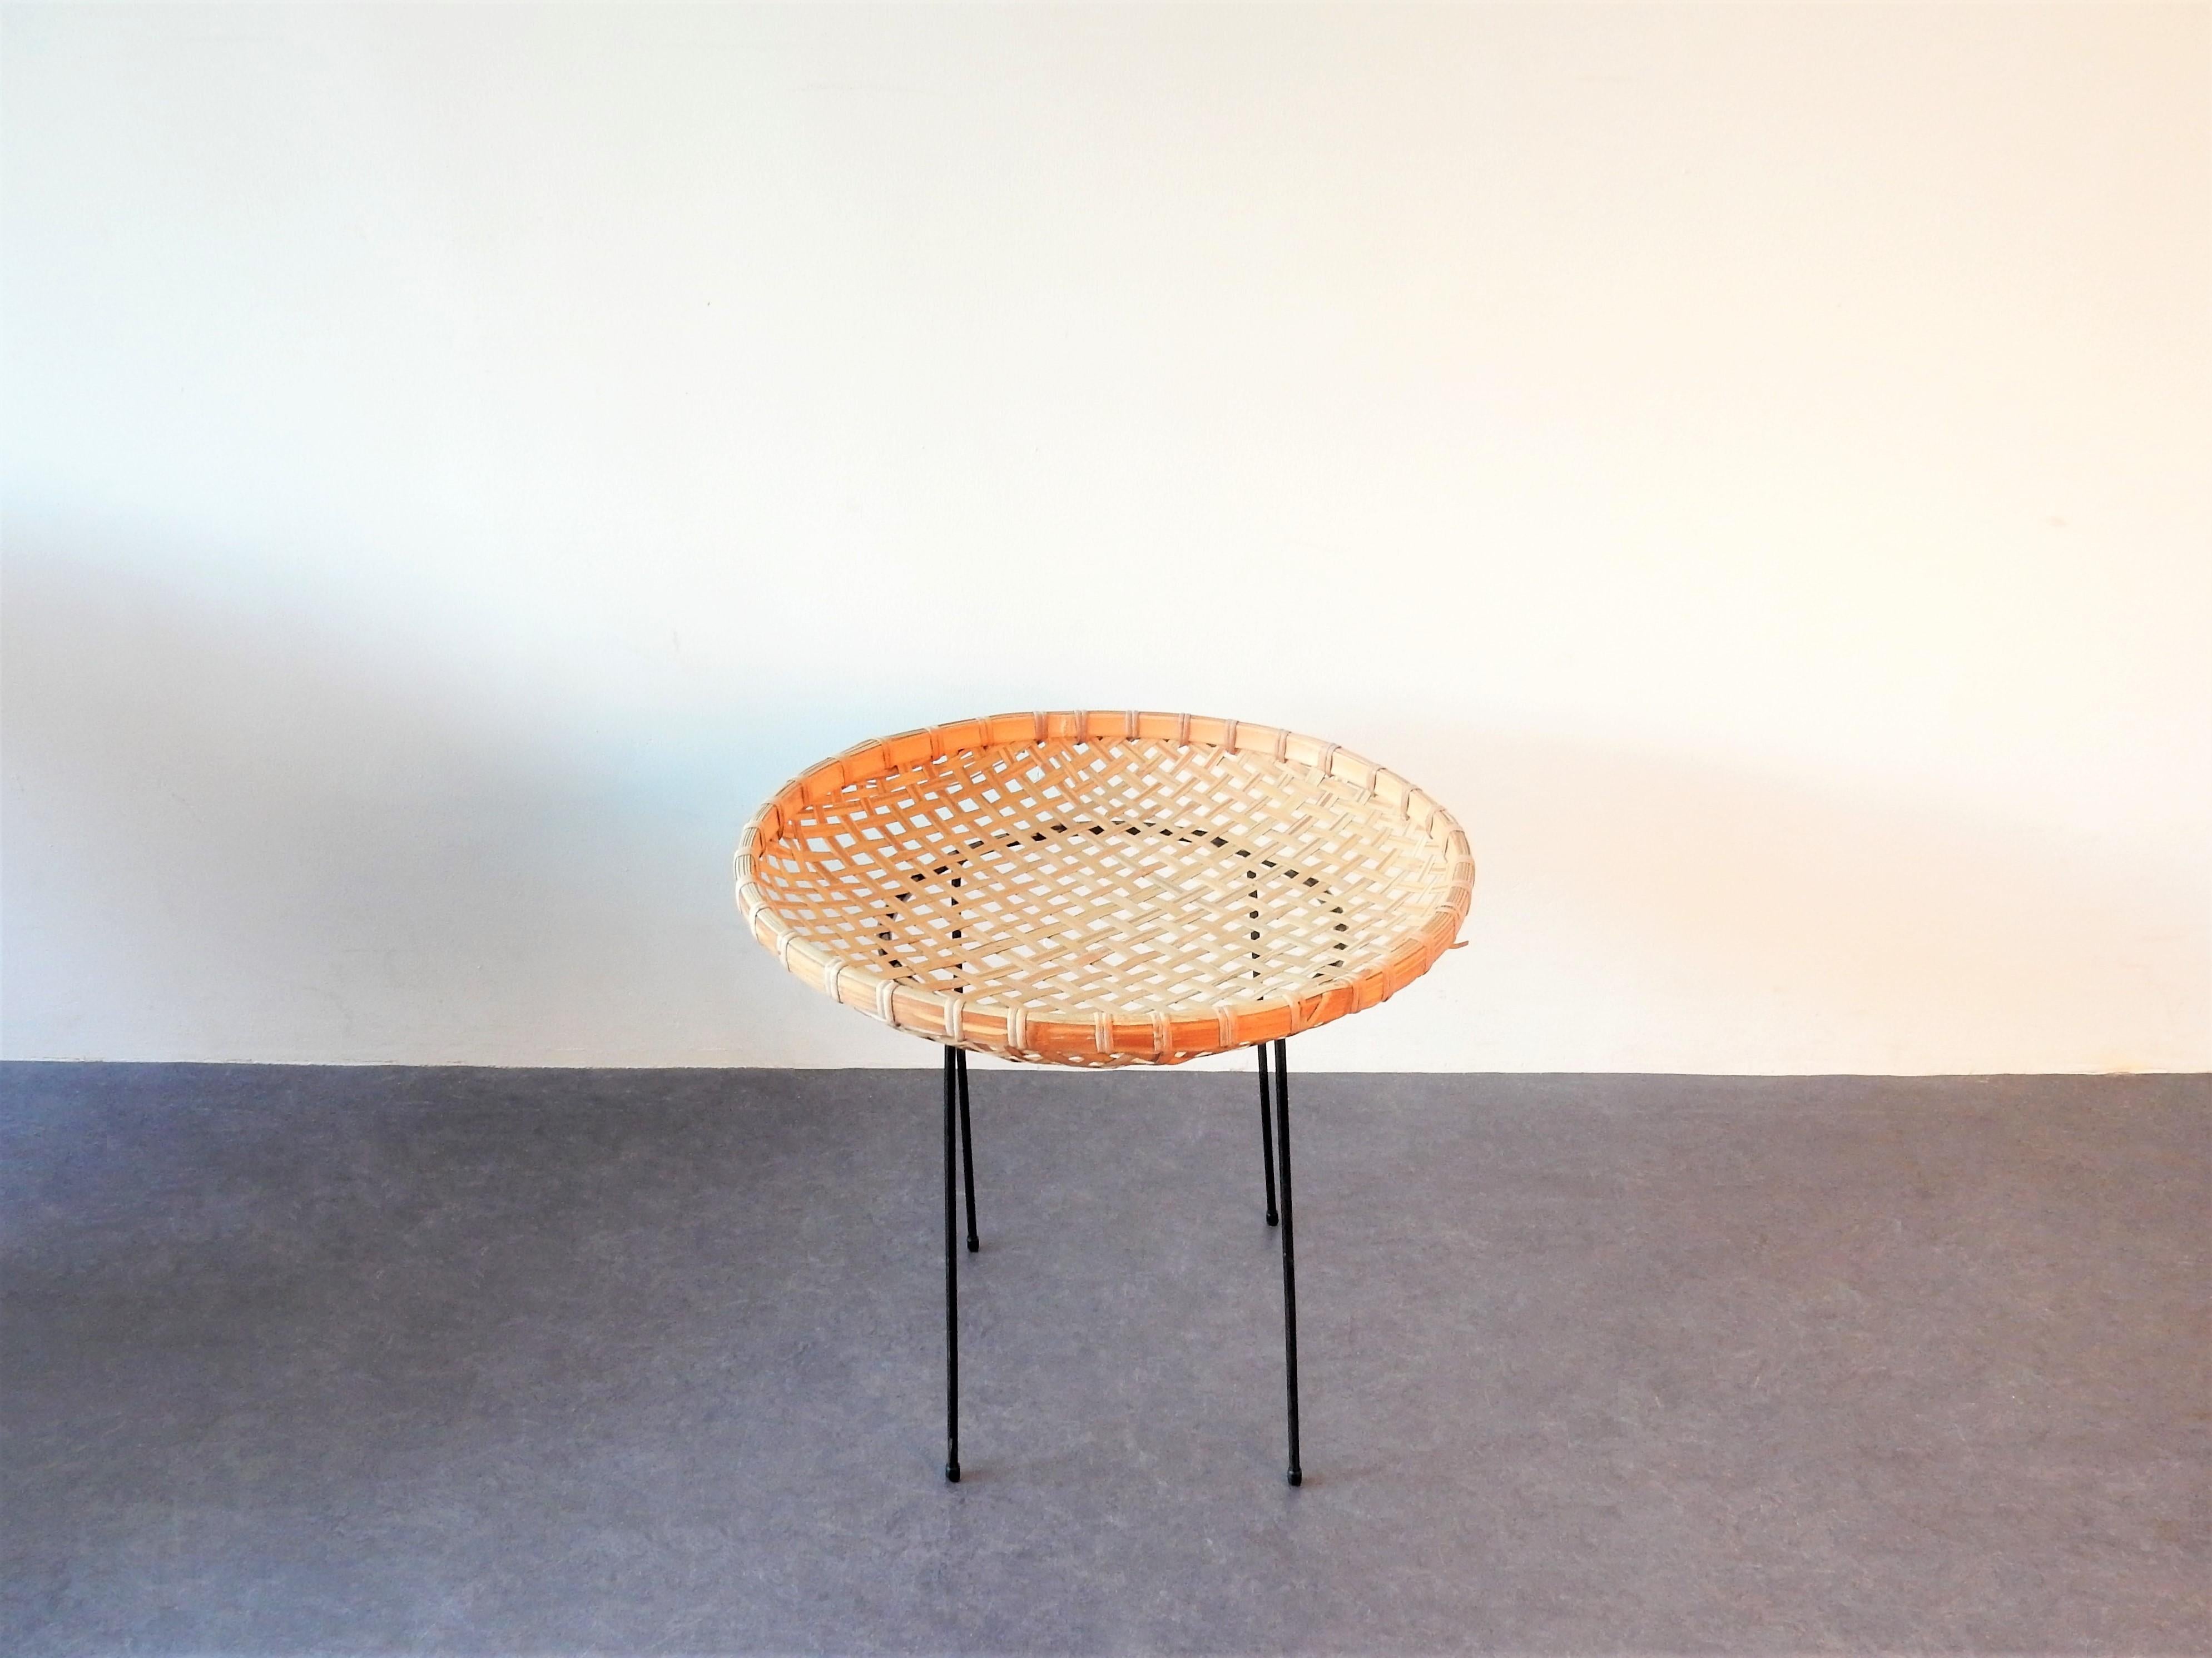 This rattan magazine basket stand was manufactured by the Dutch company Artimeta. It has a braided rattan magazine basket on a black metal stand. An elegant and minimalistic design. It is in a good condition with a small cut to 1 piece of the rattan